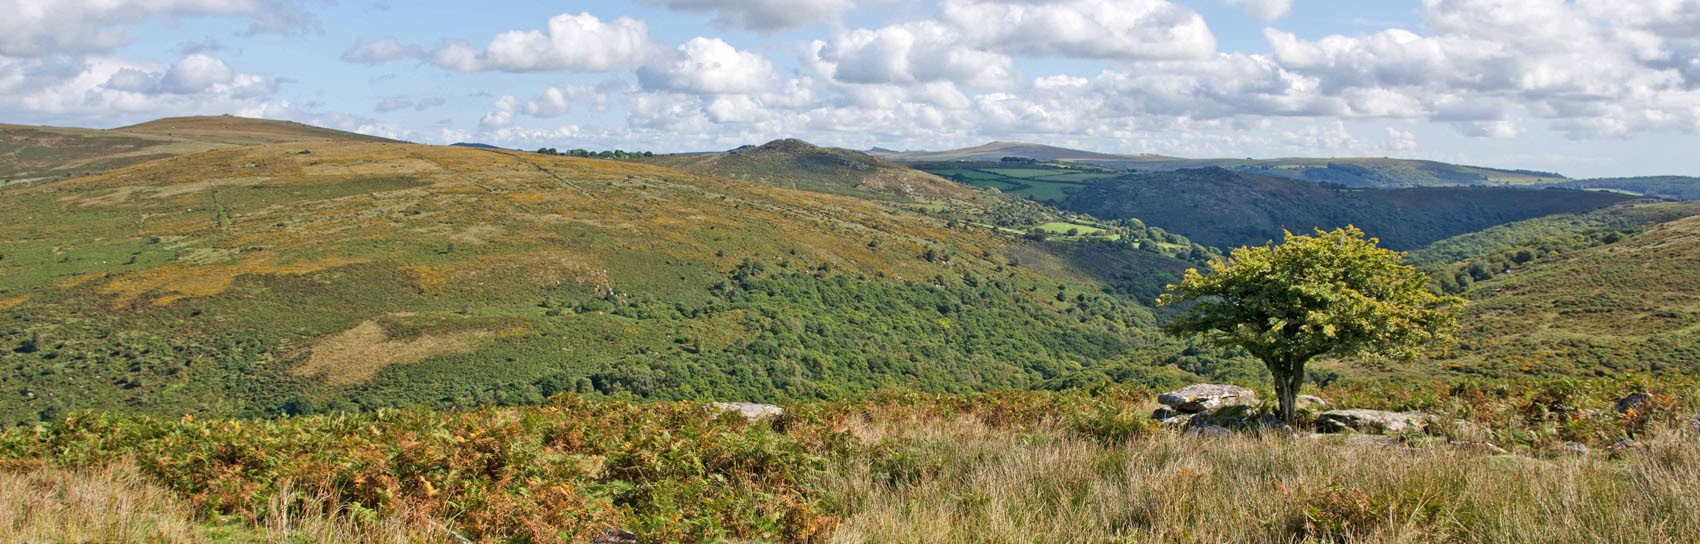 A view across Dartmoor from Combestone Tor. Photograph by ALEX GRAEME